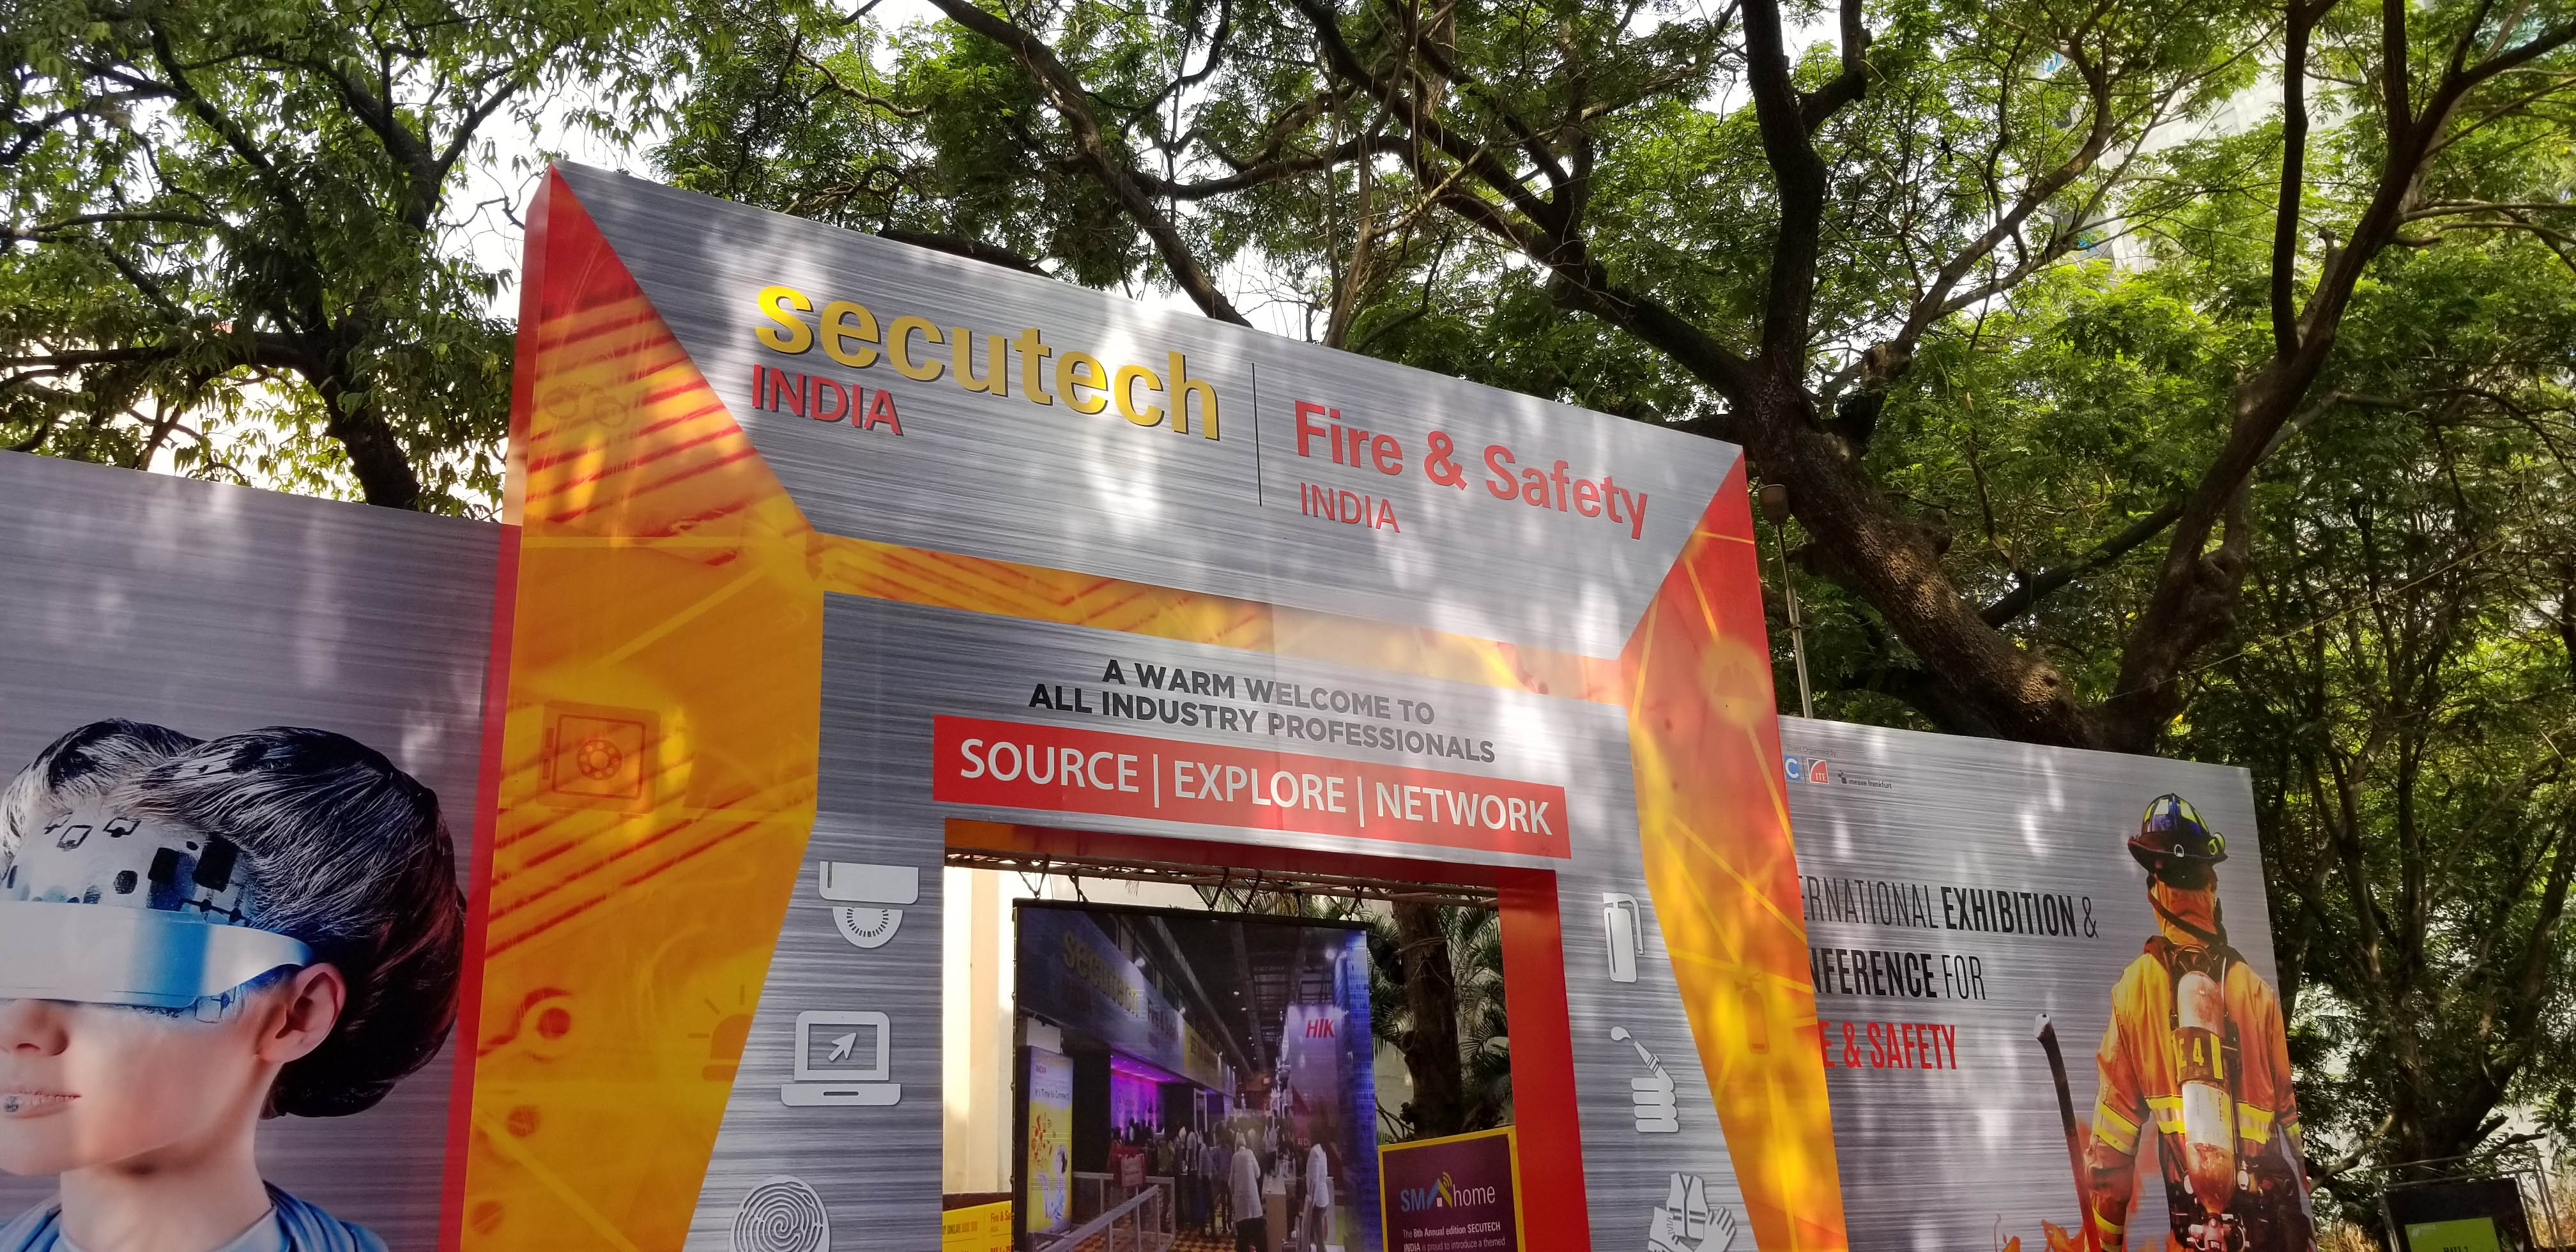 Shandong Xunkai attended exhibition of India International fire  equipment exhibition from 25-27th 